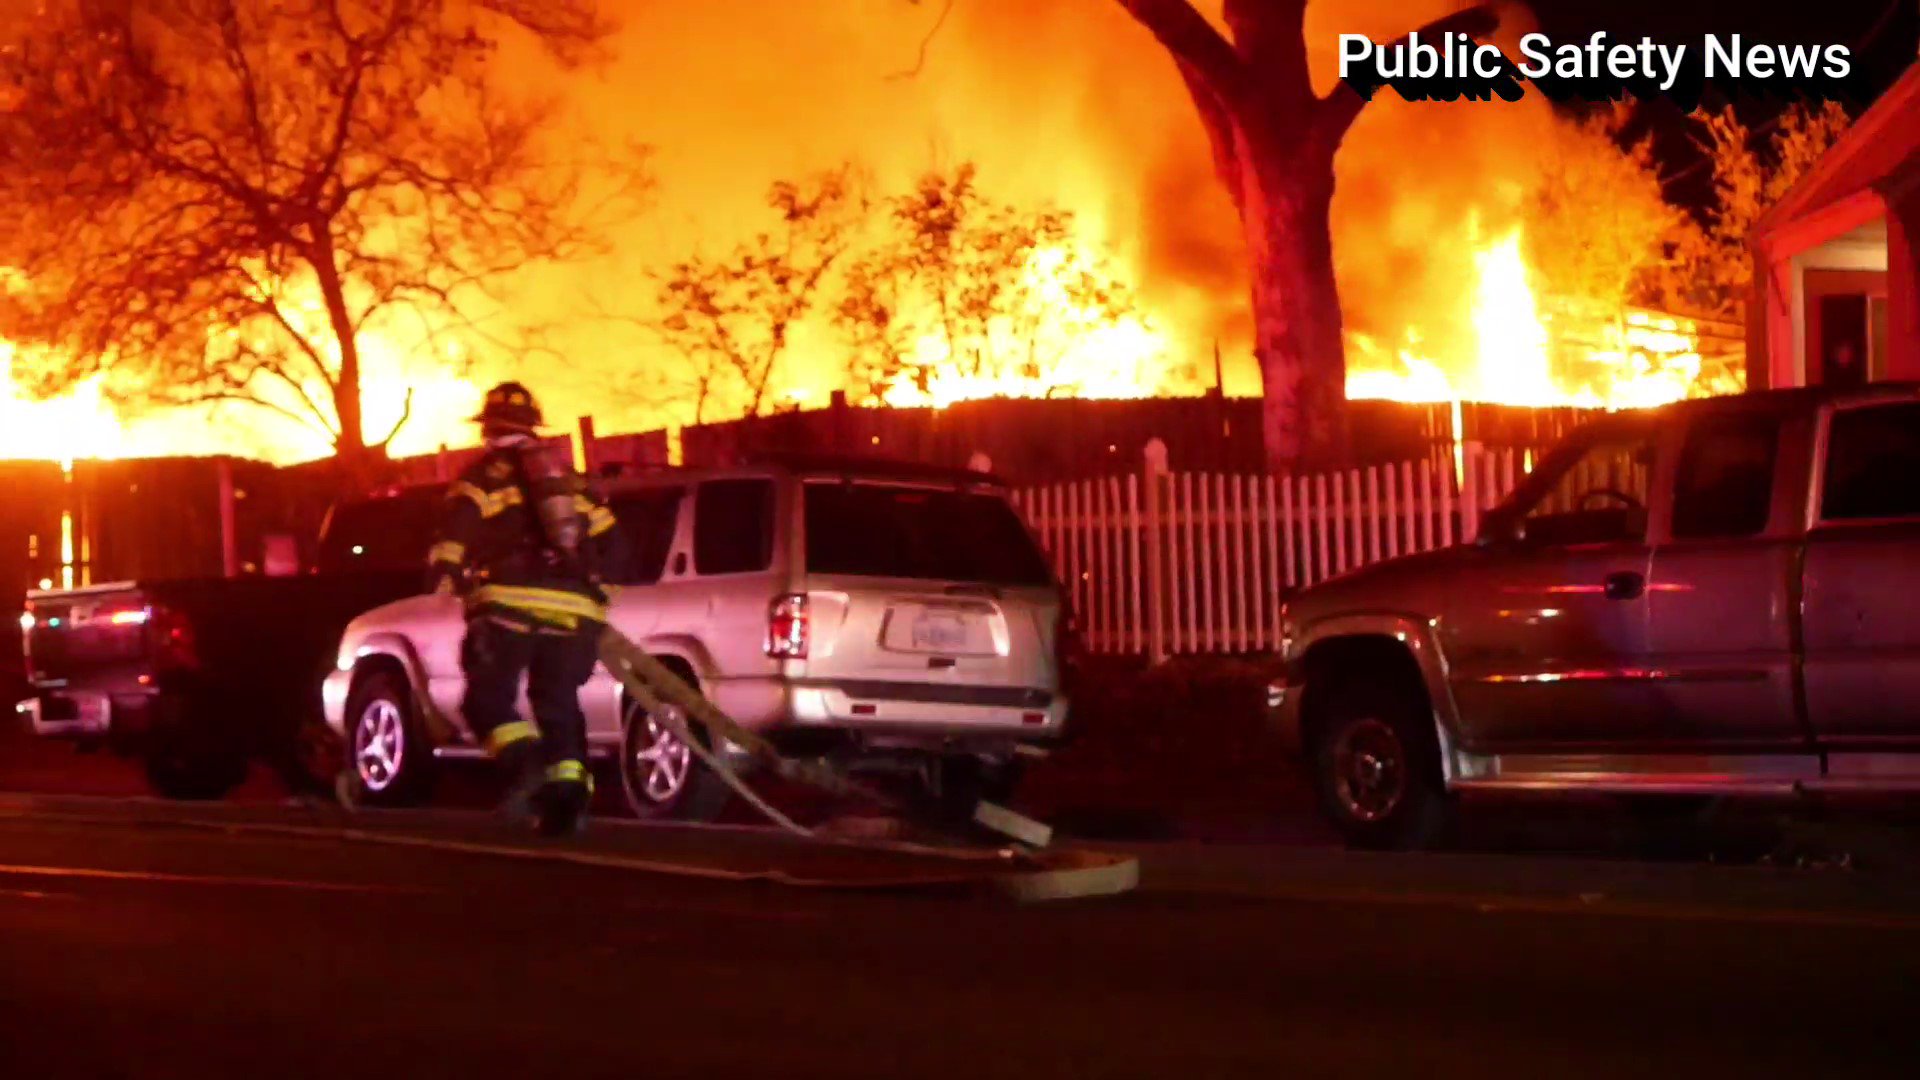 An inferno erupts at an unoccupied home, police evacuate surrounding homes